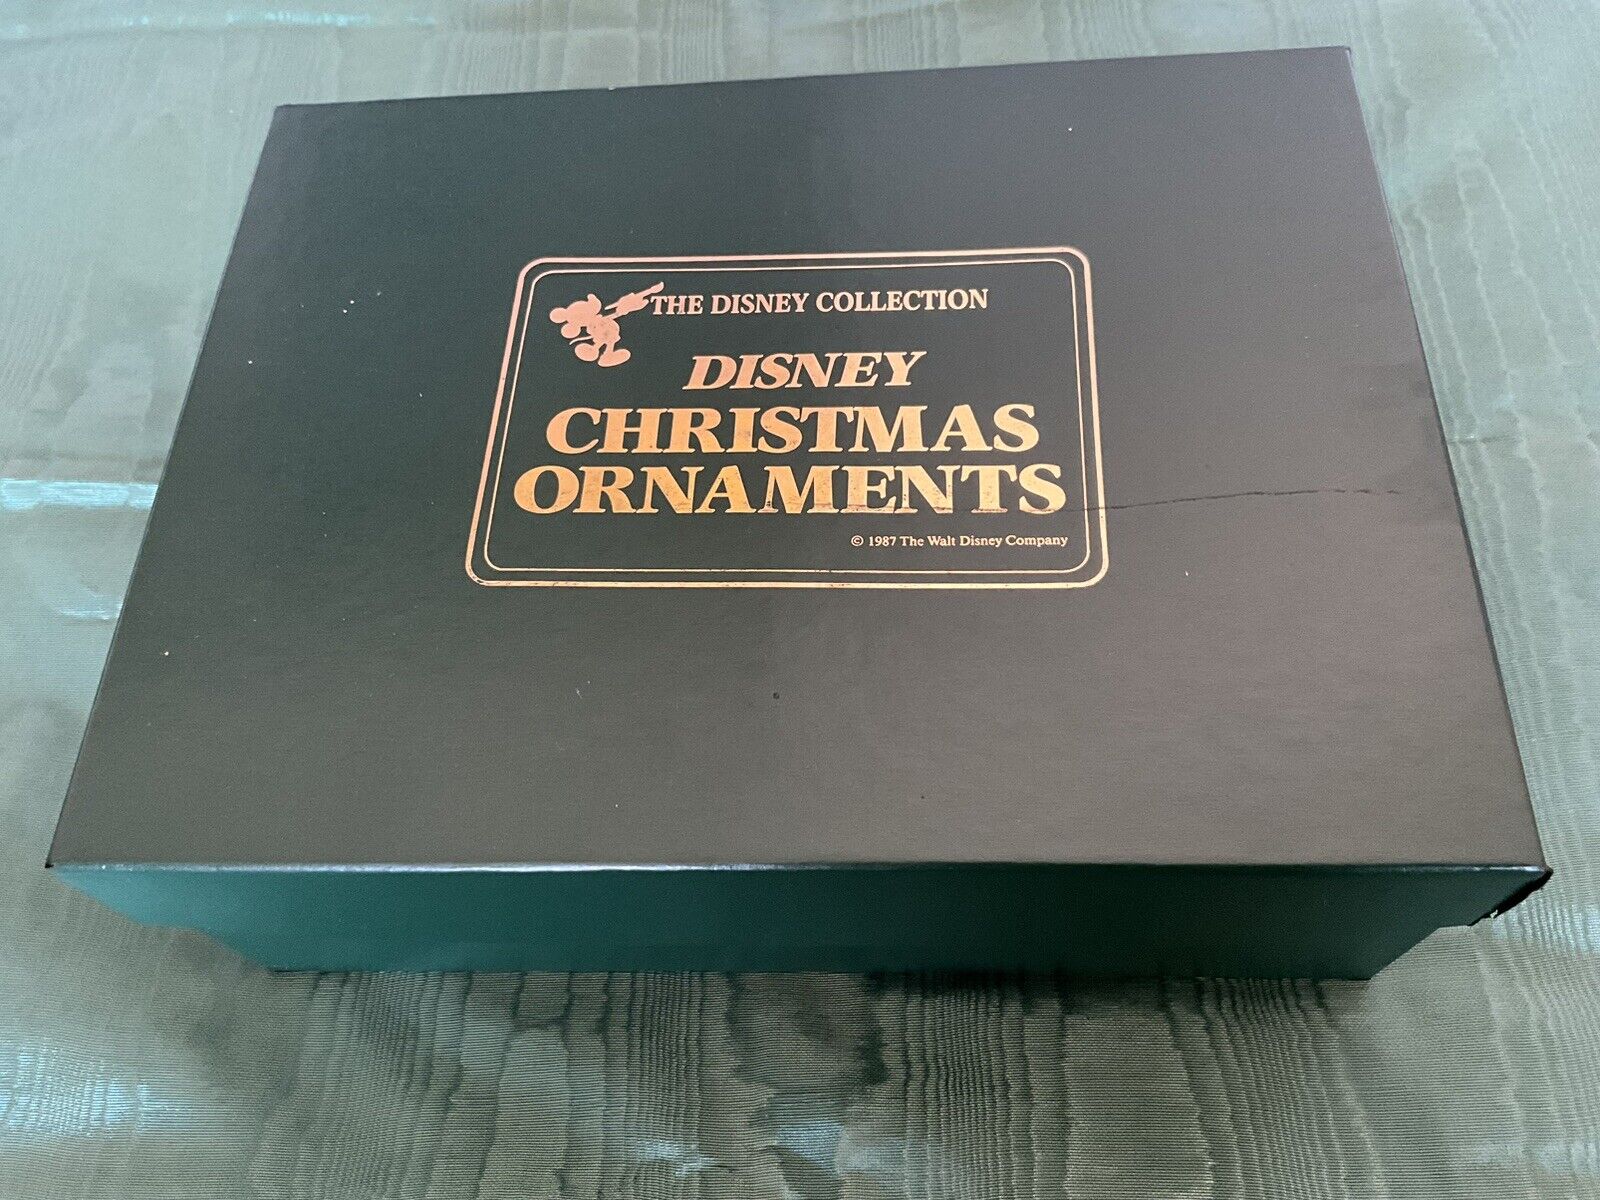 1987 THE DISNEY COLLECTION DISNEY CHRISTMAS ORNAMENTS IN ORIGINAL BOX